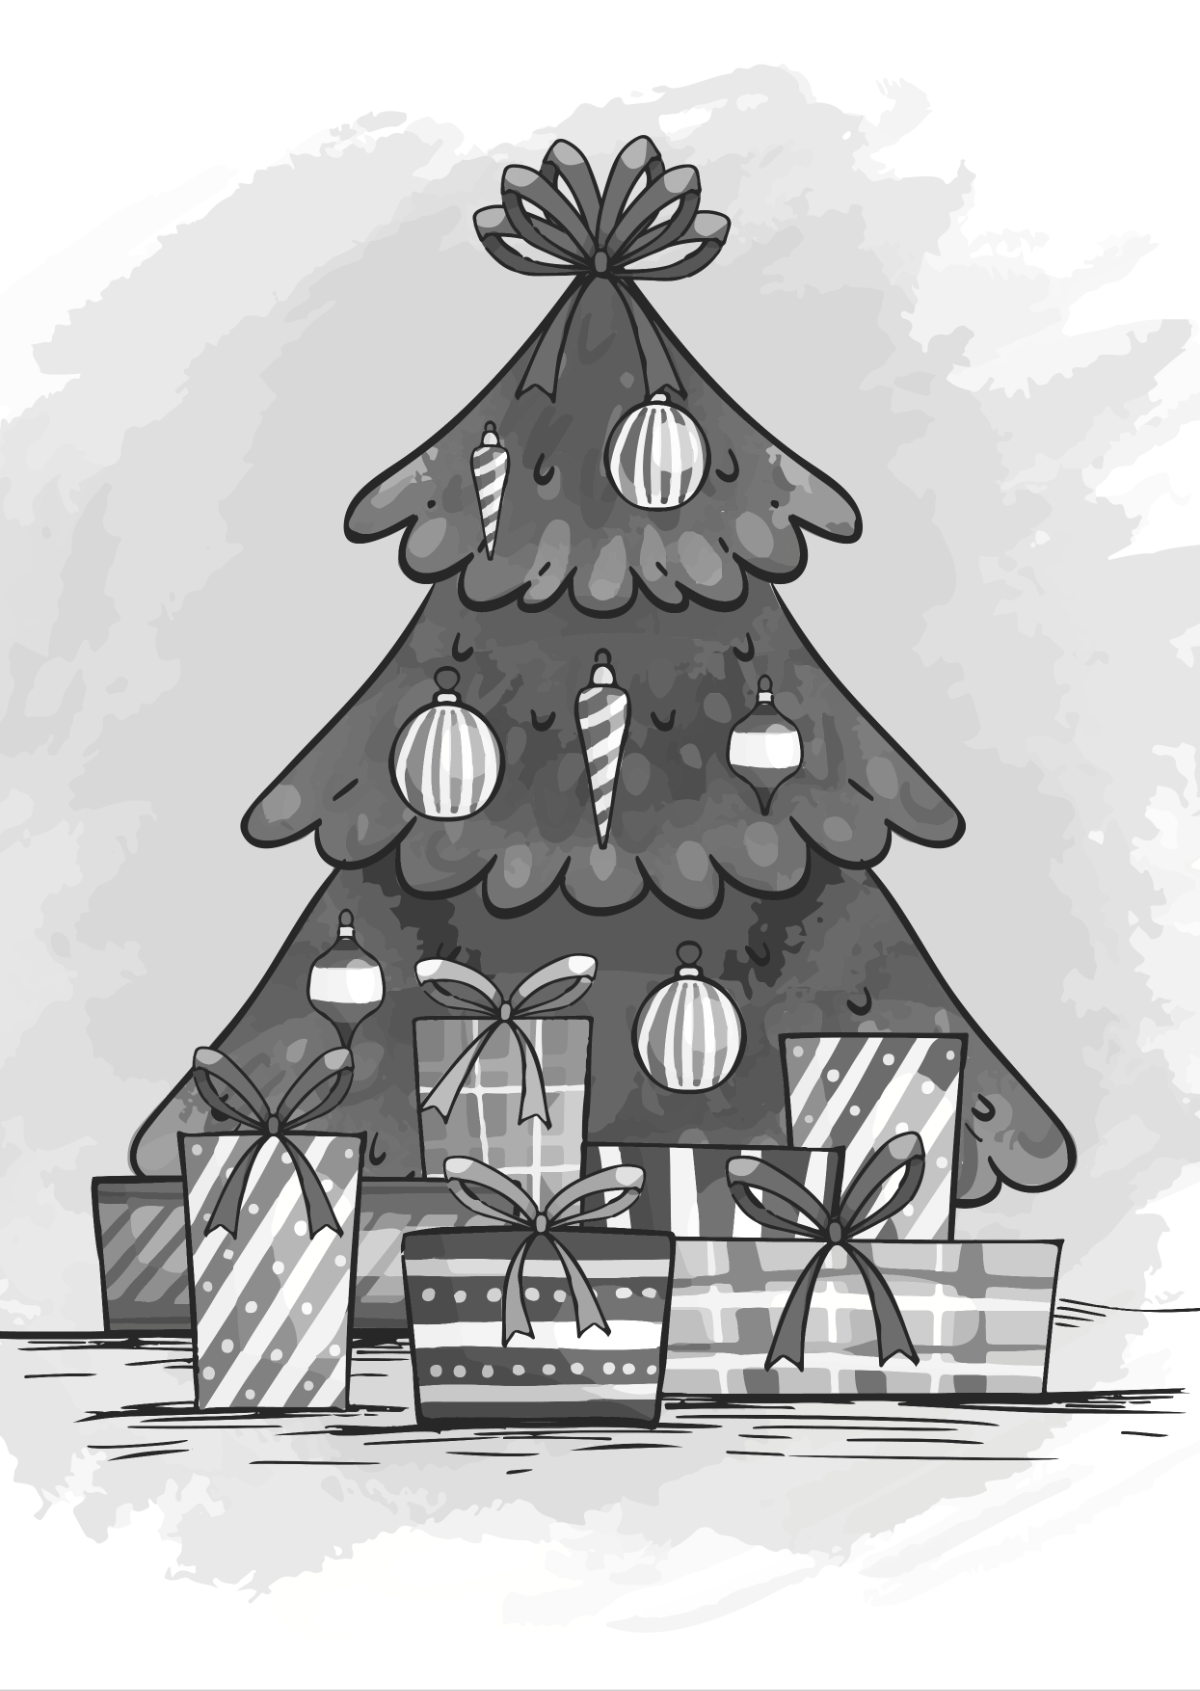 Christmas Tree Drawing - How To Draw A Christmas Tree Step By Step!